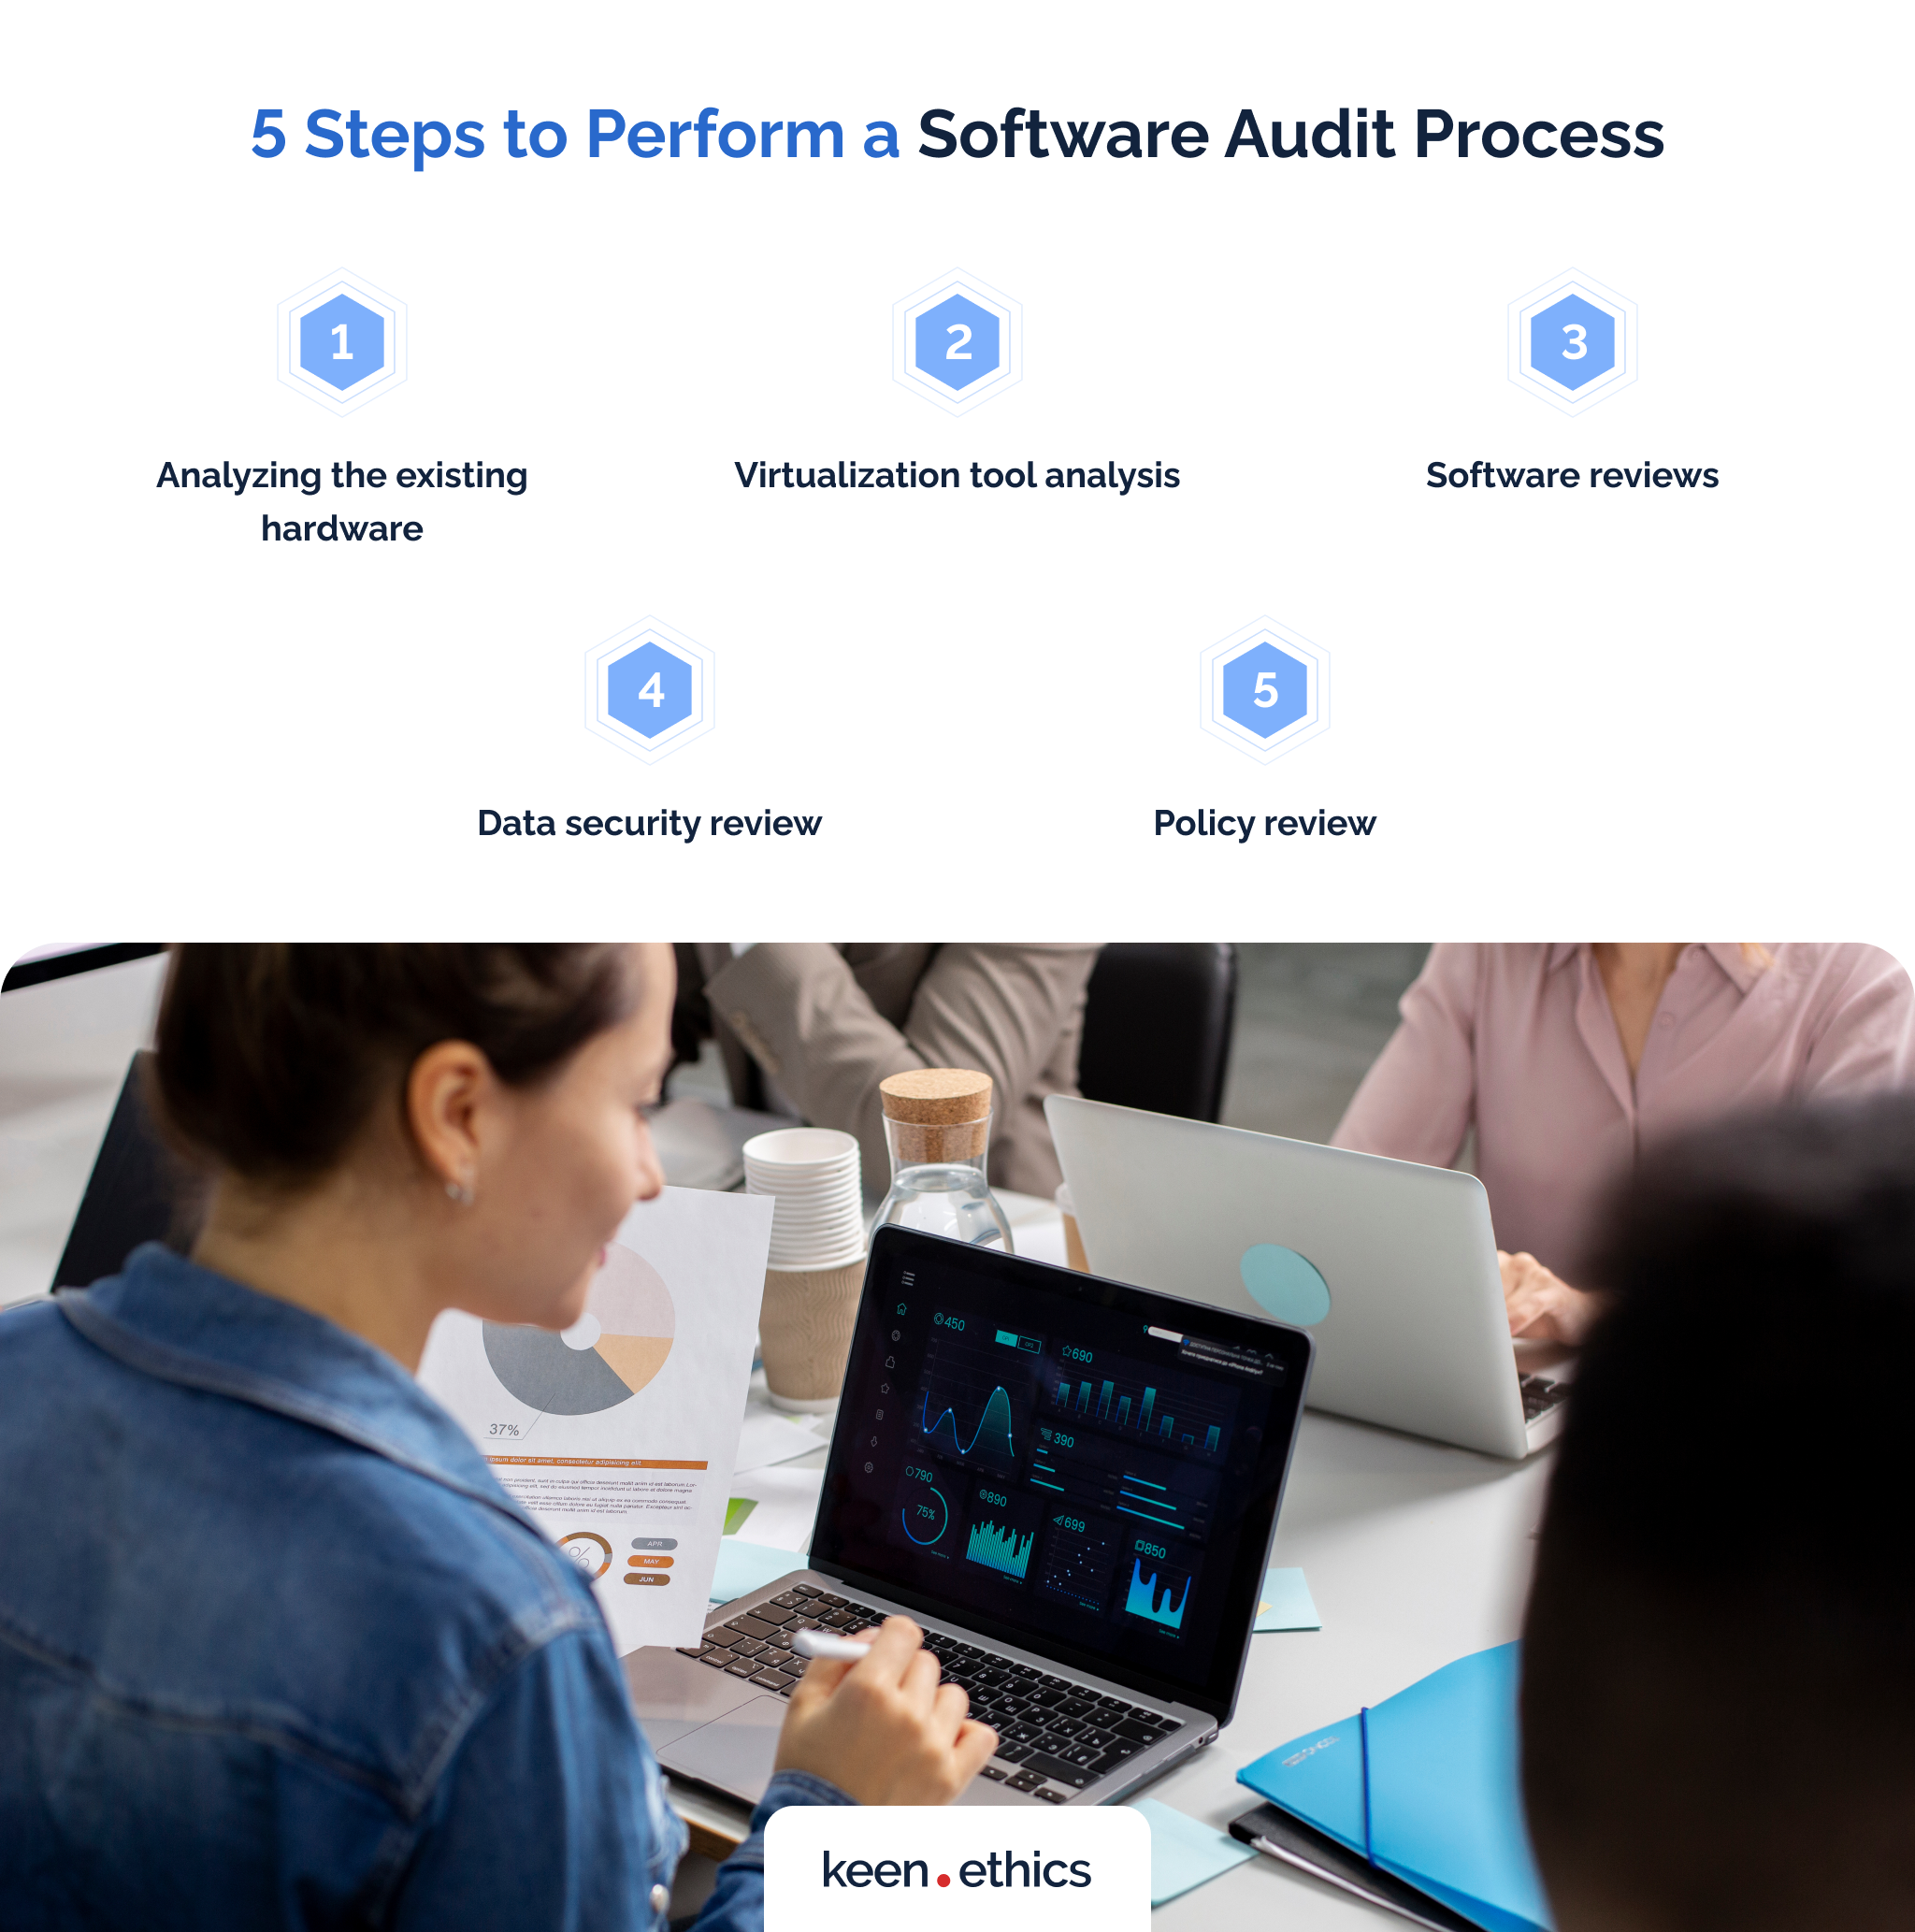 5 steps to perform a software audit process